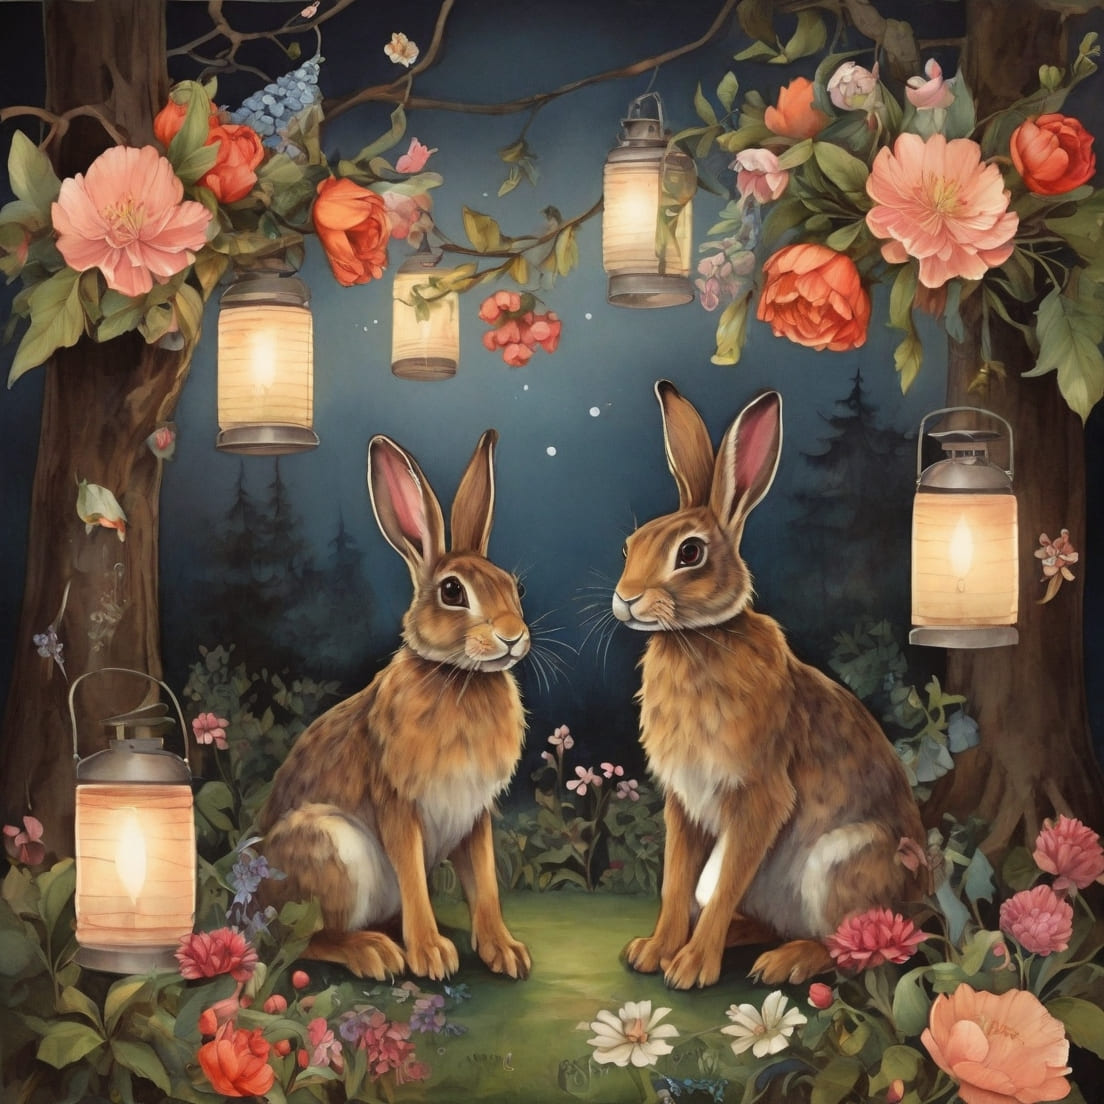 postcard, flowers, trees, cats, lanterns, hares preview image.